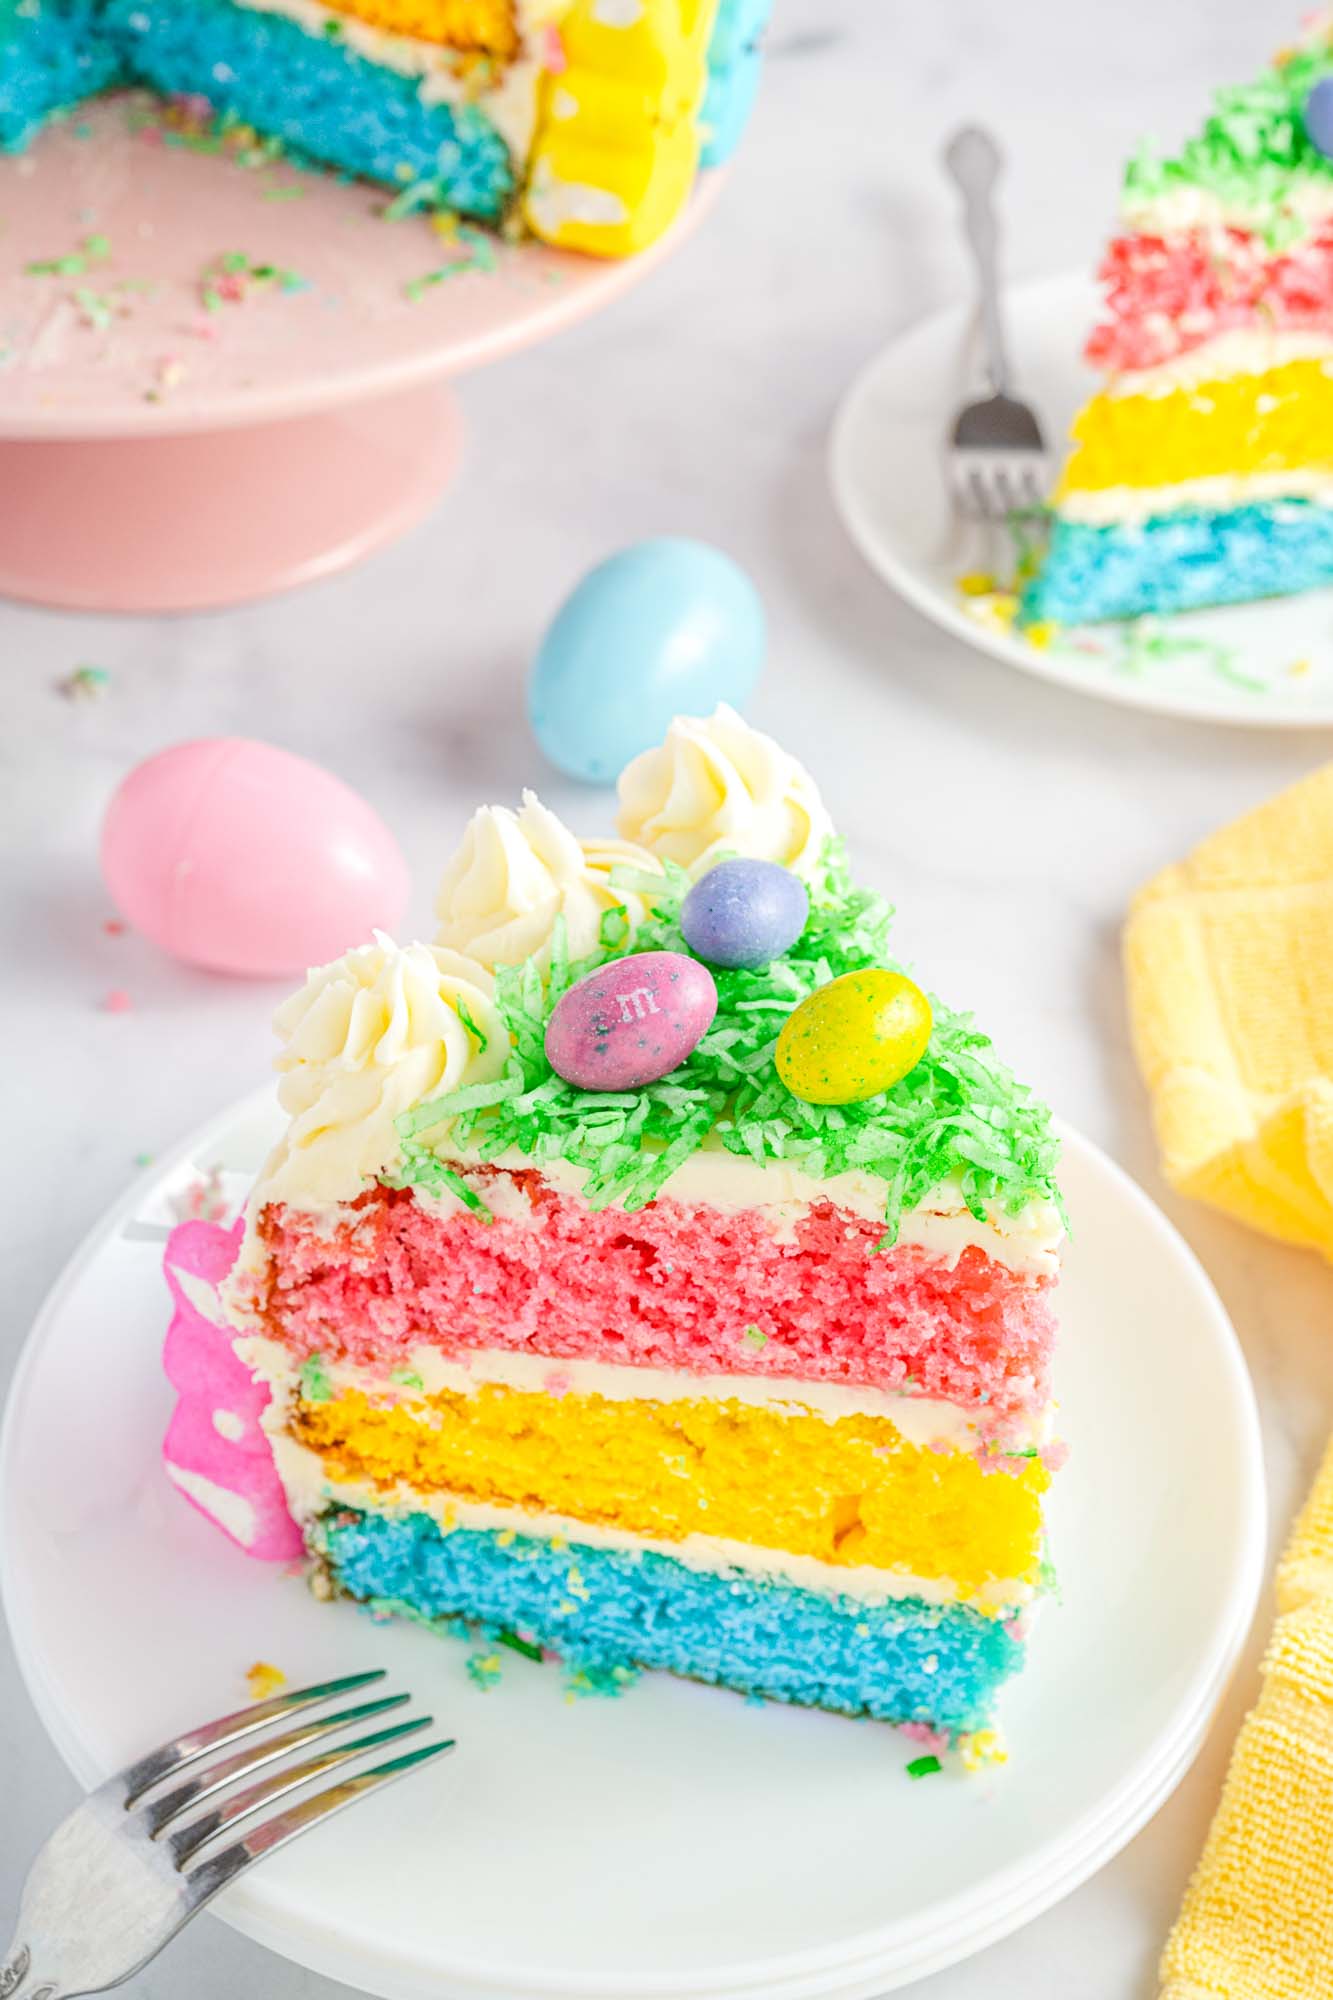 A slice of colorful layer cake with easter decorations served on a white plate with a fork